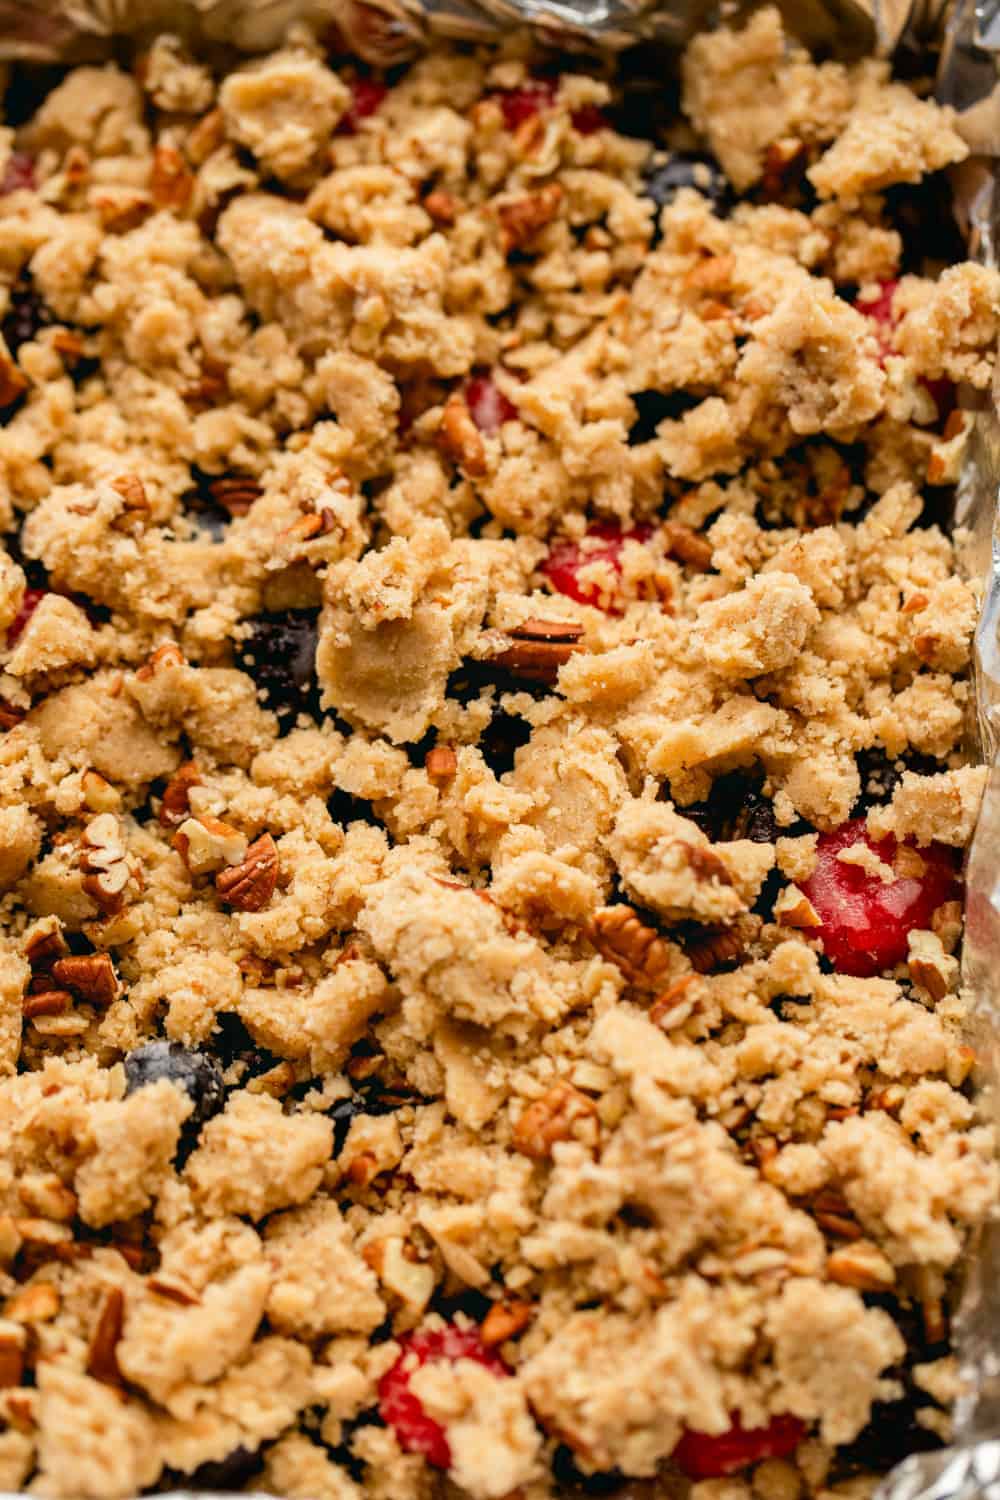 Take Berry Crumble Bars to any spring brunch or party. They'll be a hit!